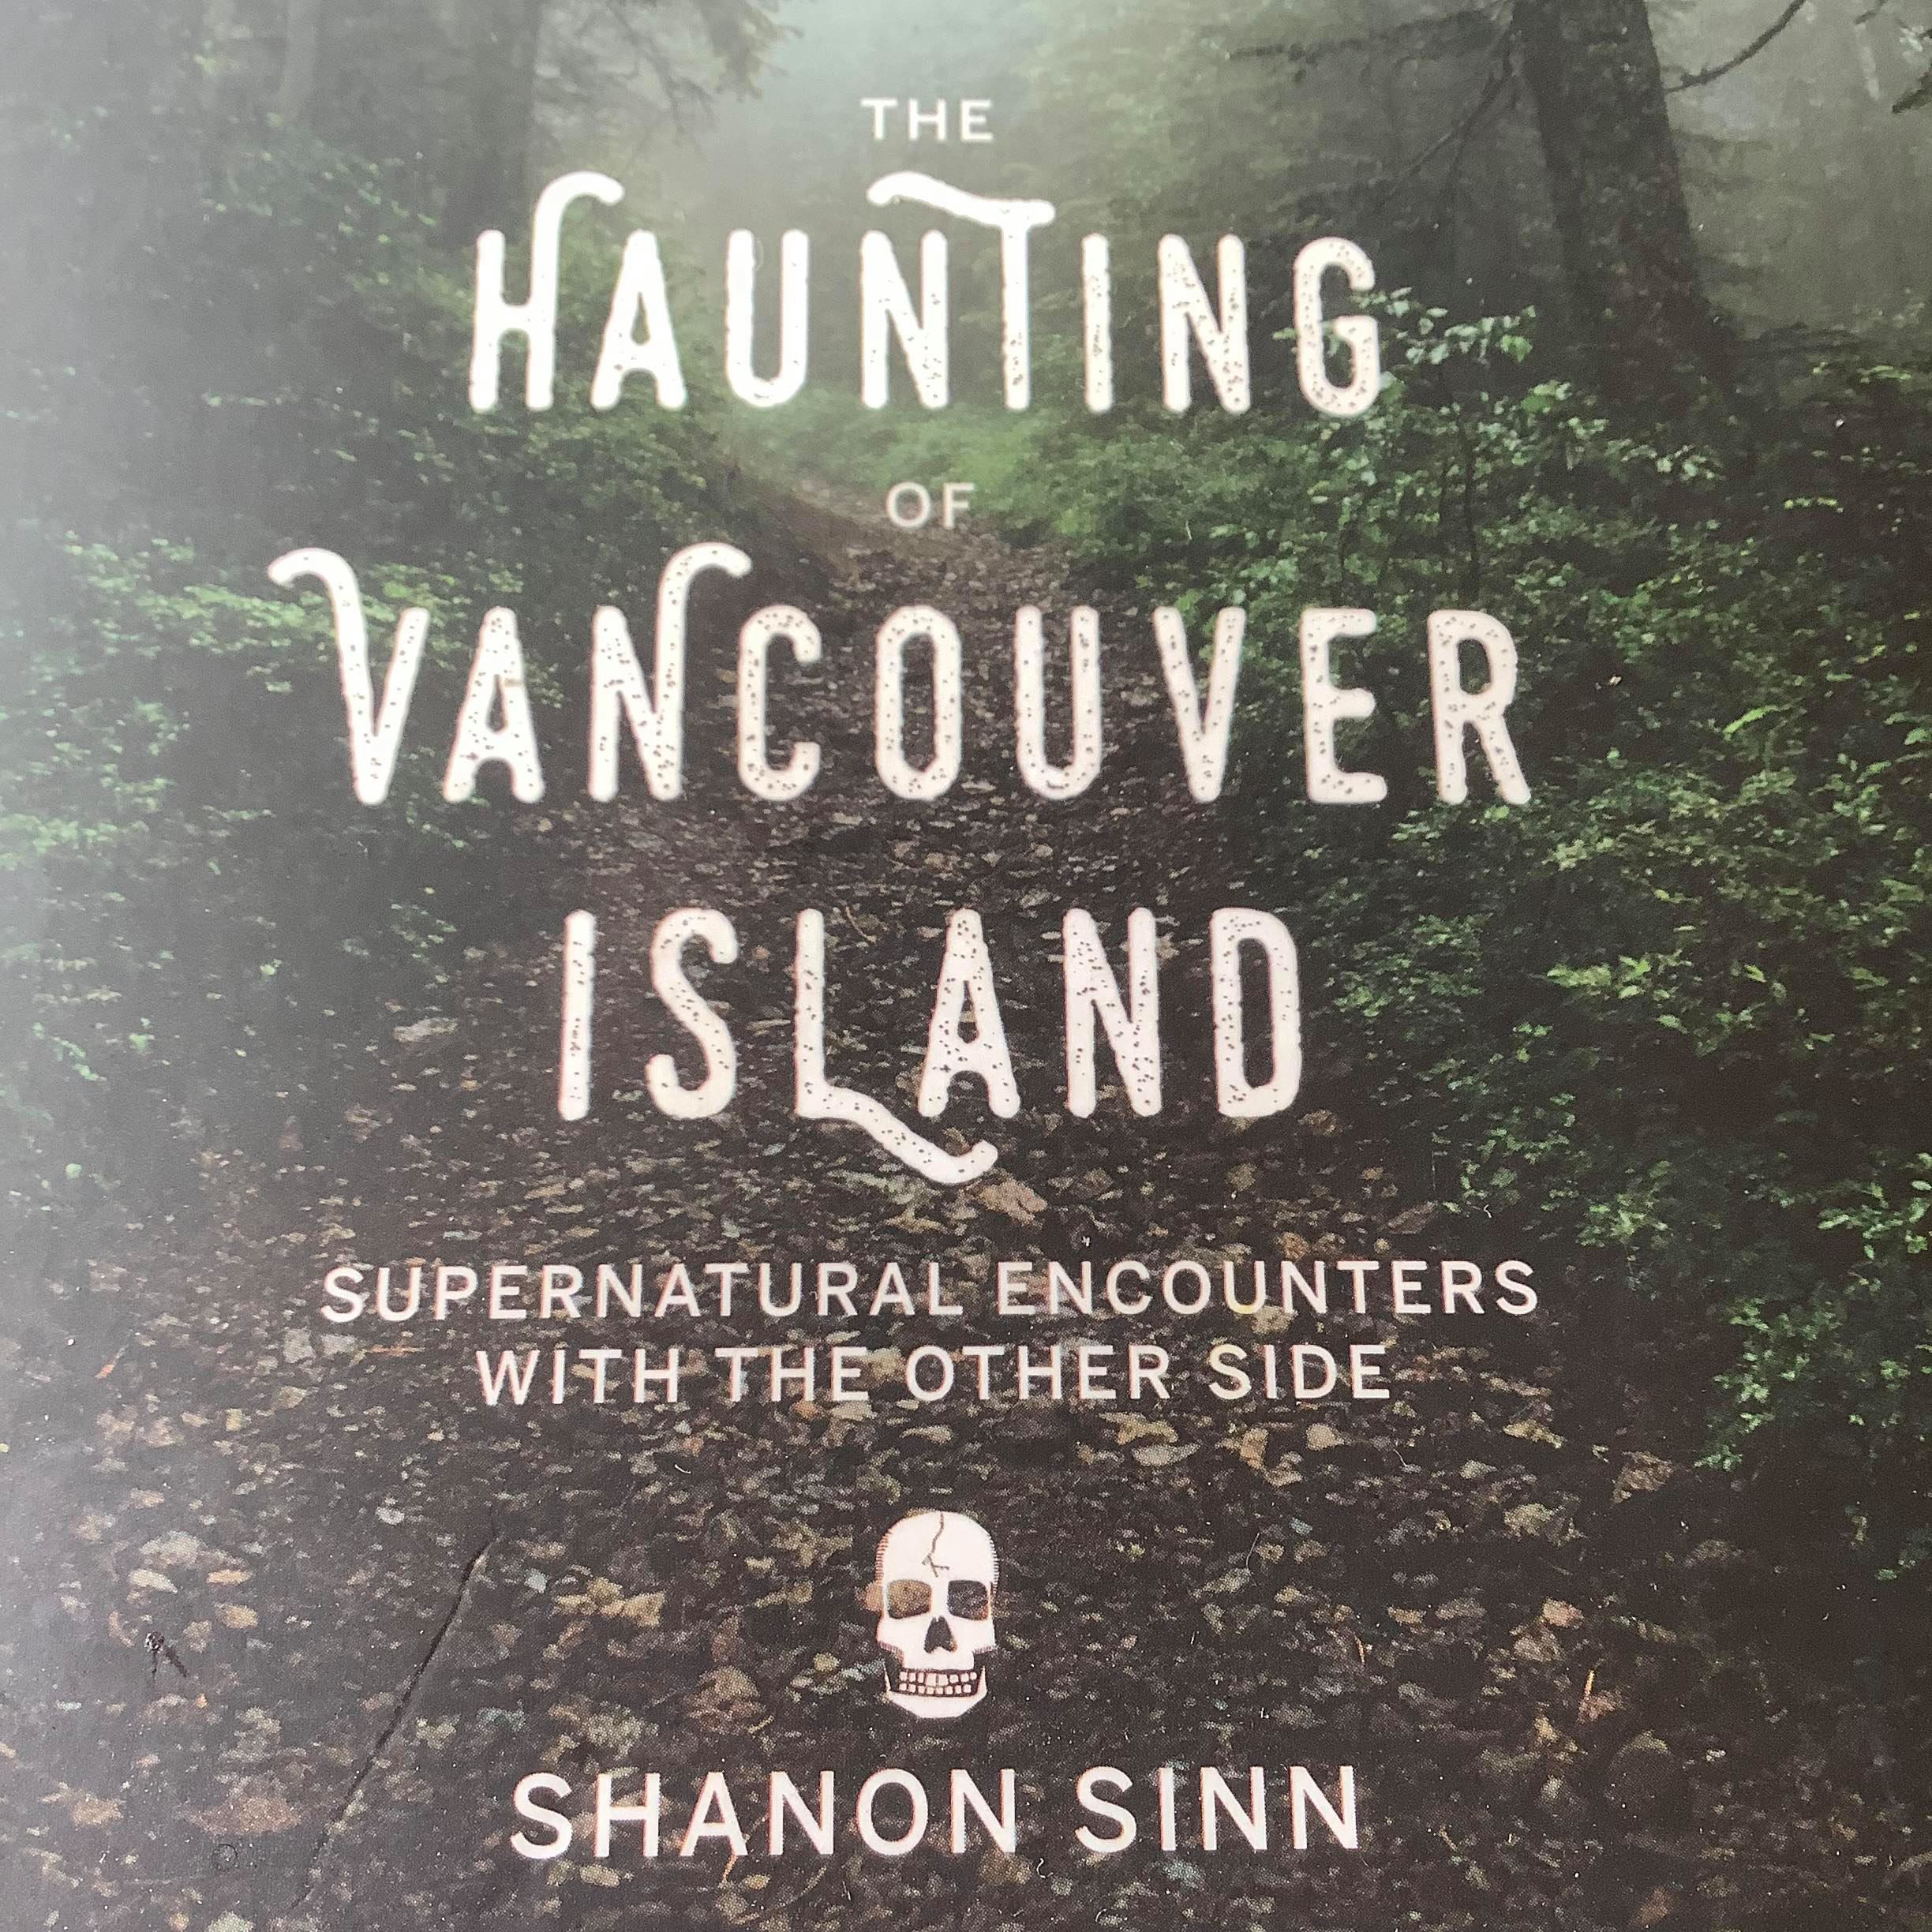 The Haunting of Vancouver Island by Shanon Sinn